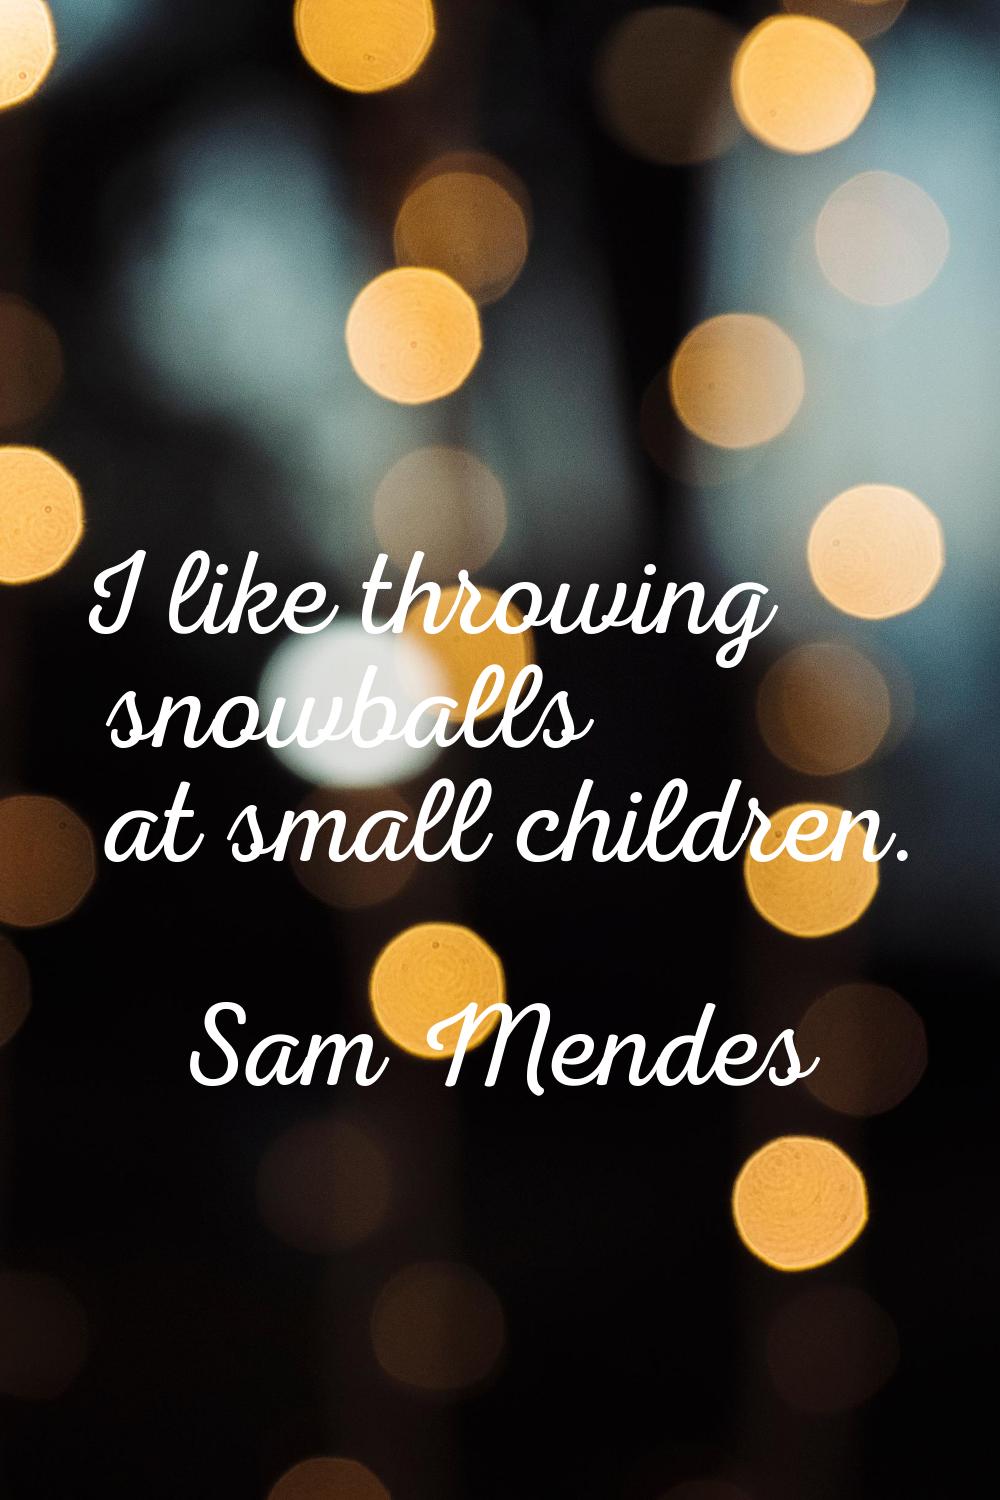 I like throwing snowballs at small children.